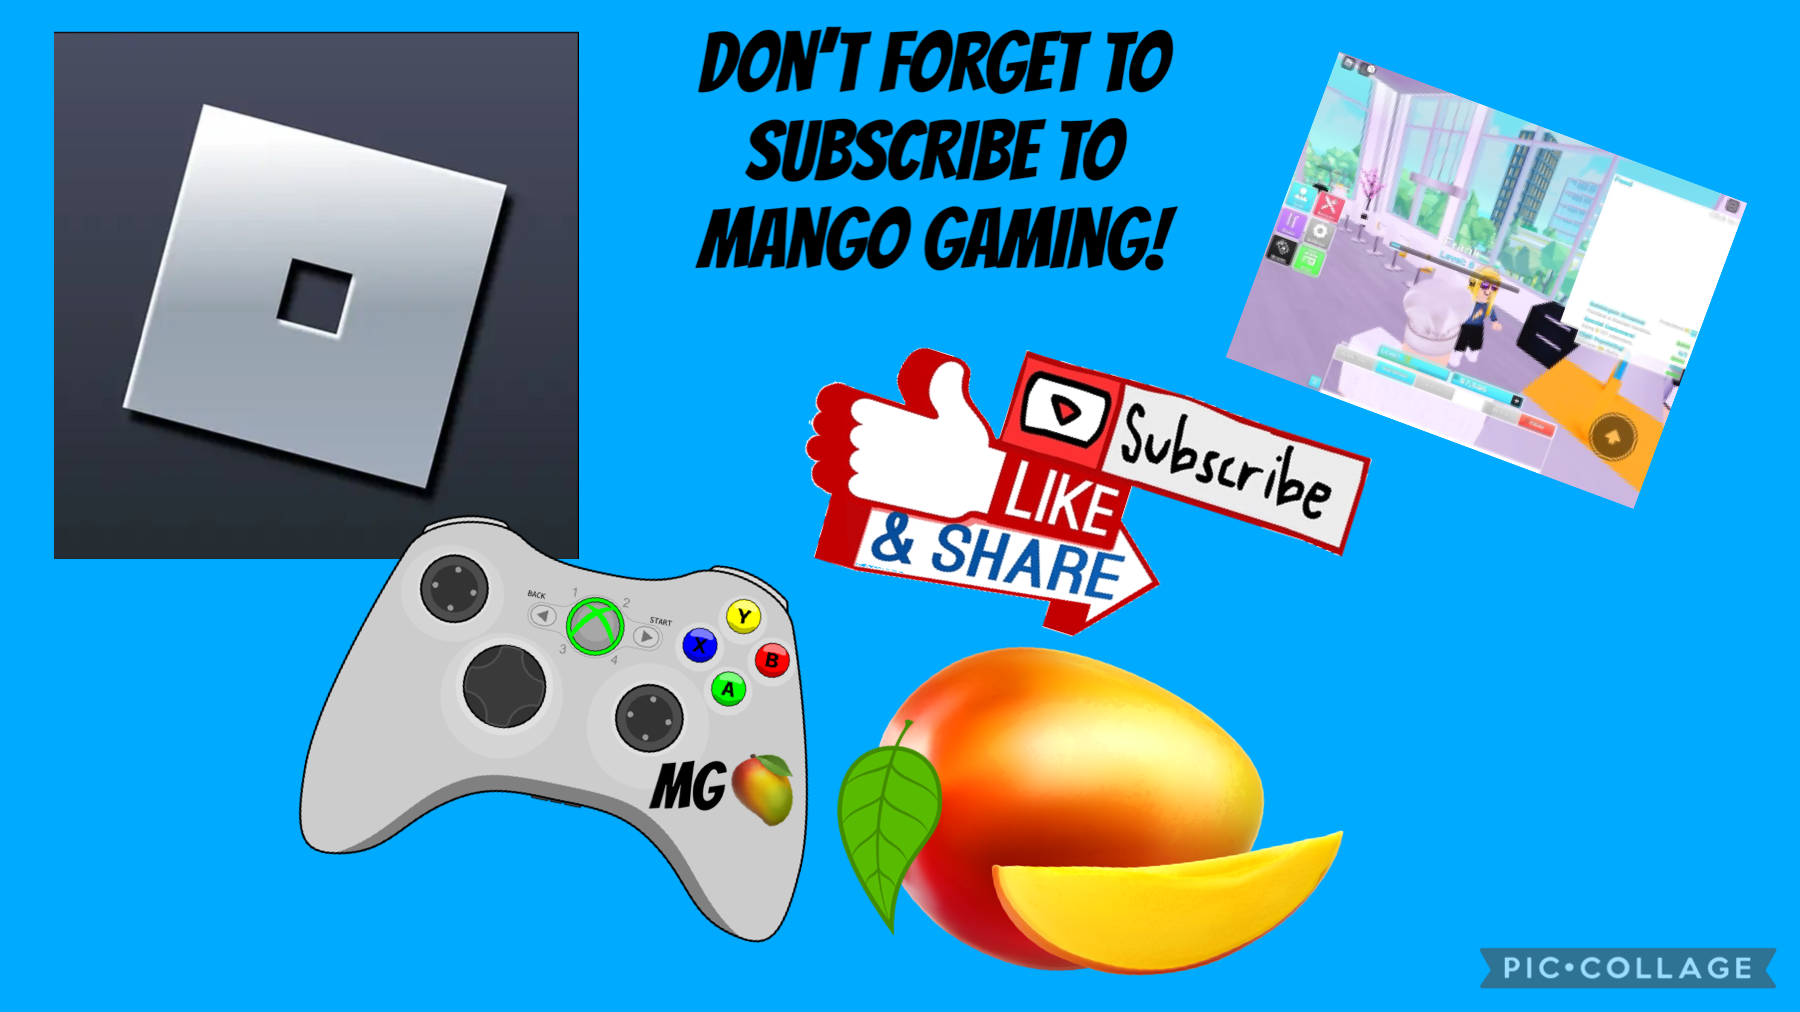 Sub to Mango Gaming on yt when I make the channel! 